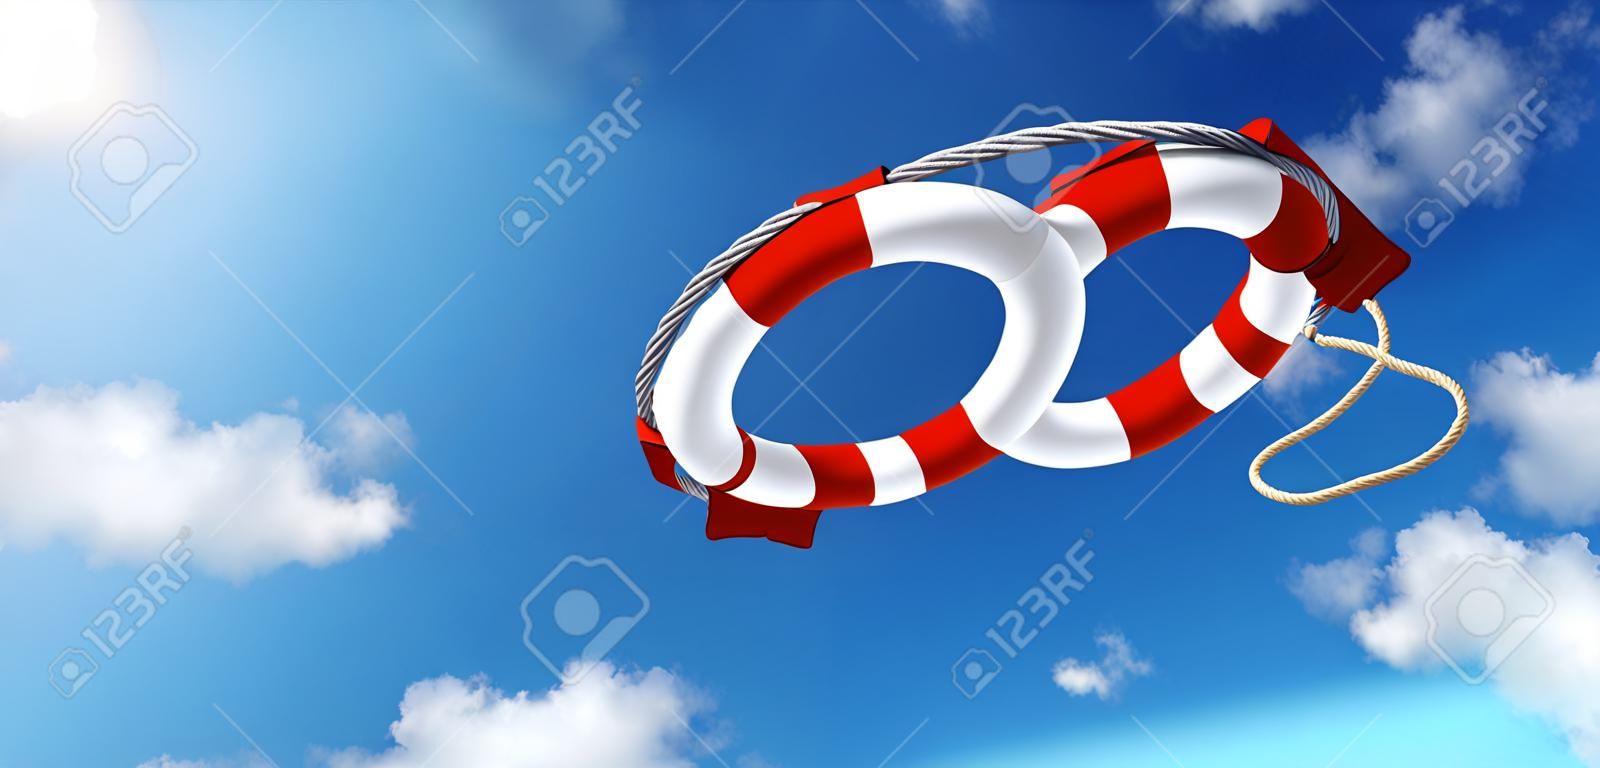 Throwing A Life Preserver In The Sky - Help Concept